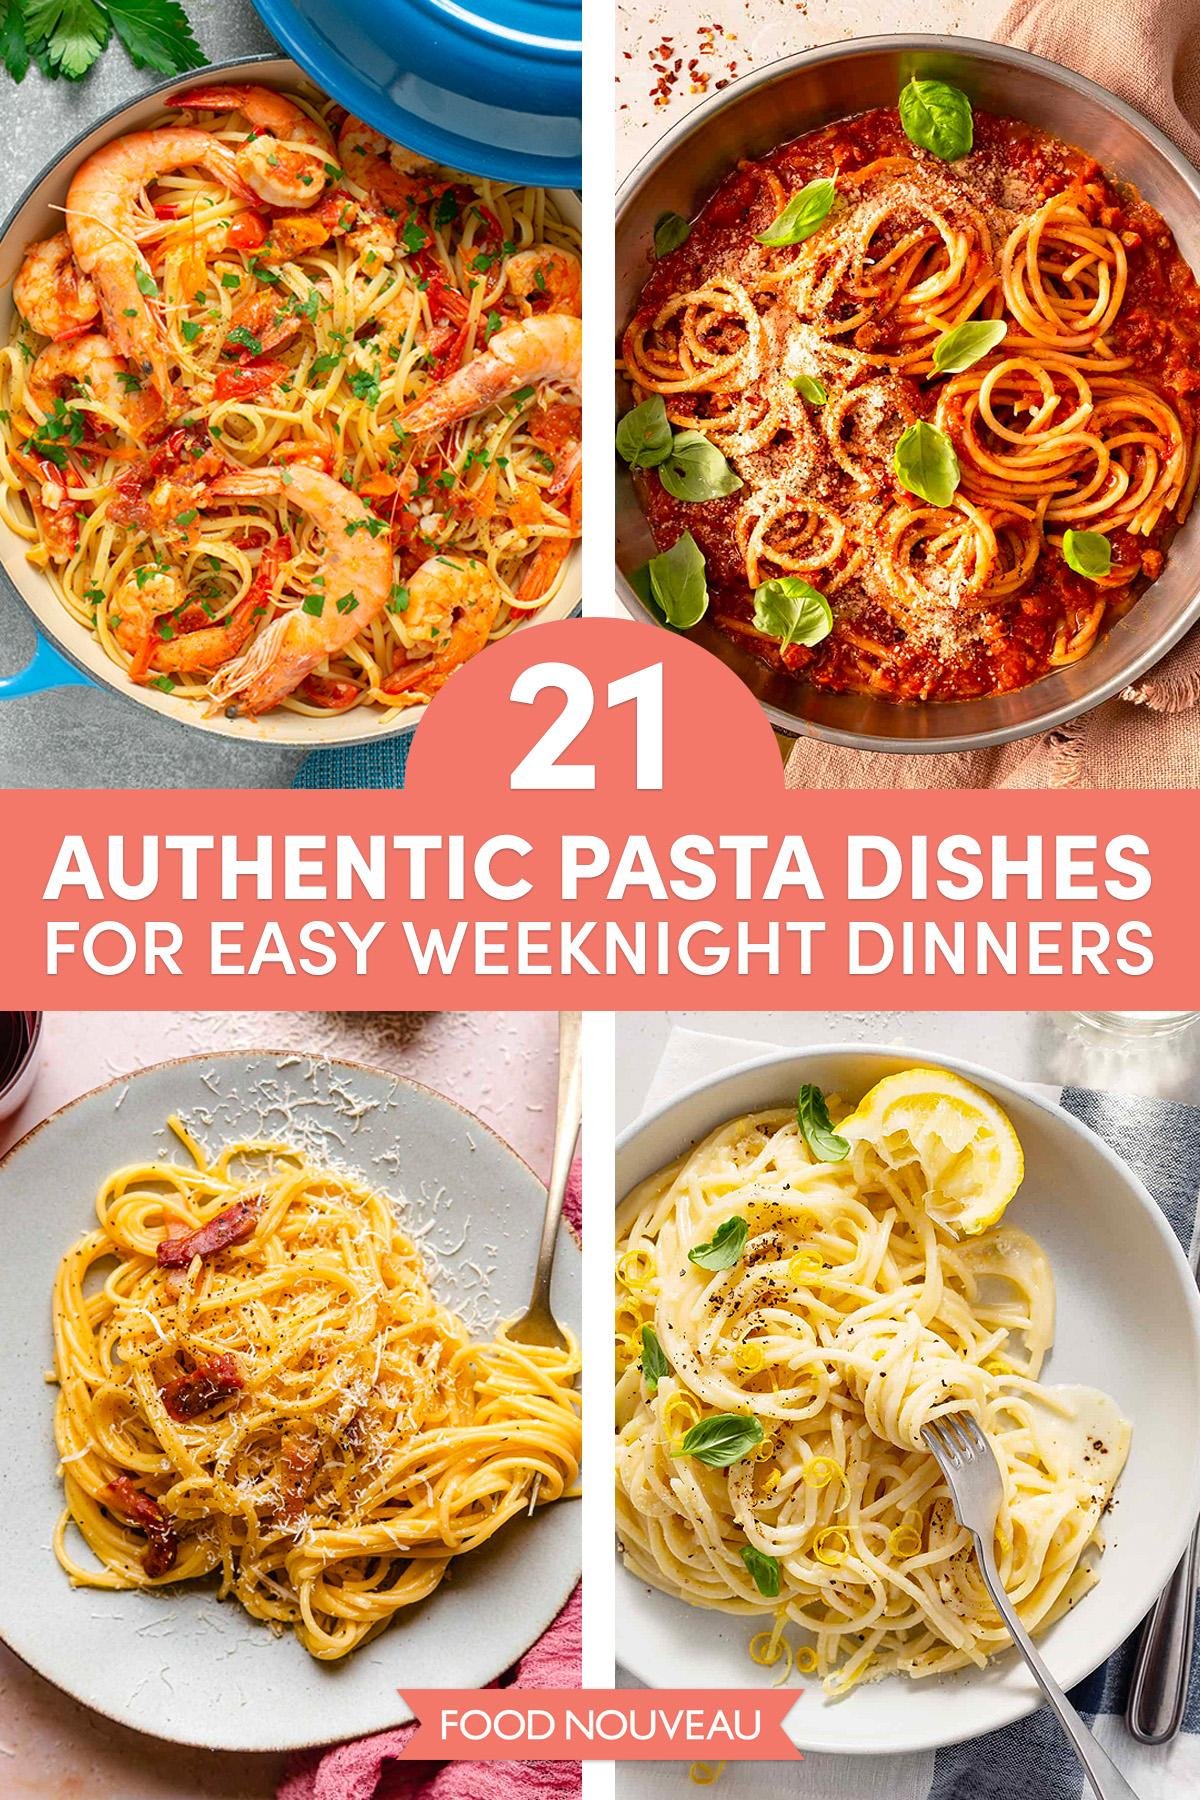 10 Simple and Delicious Pasta Recipes for Busy Weeknights